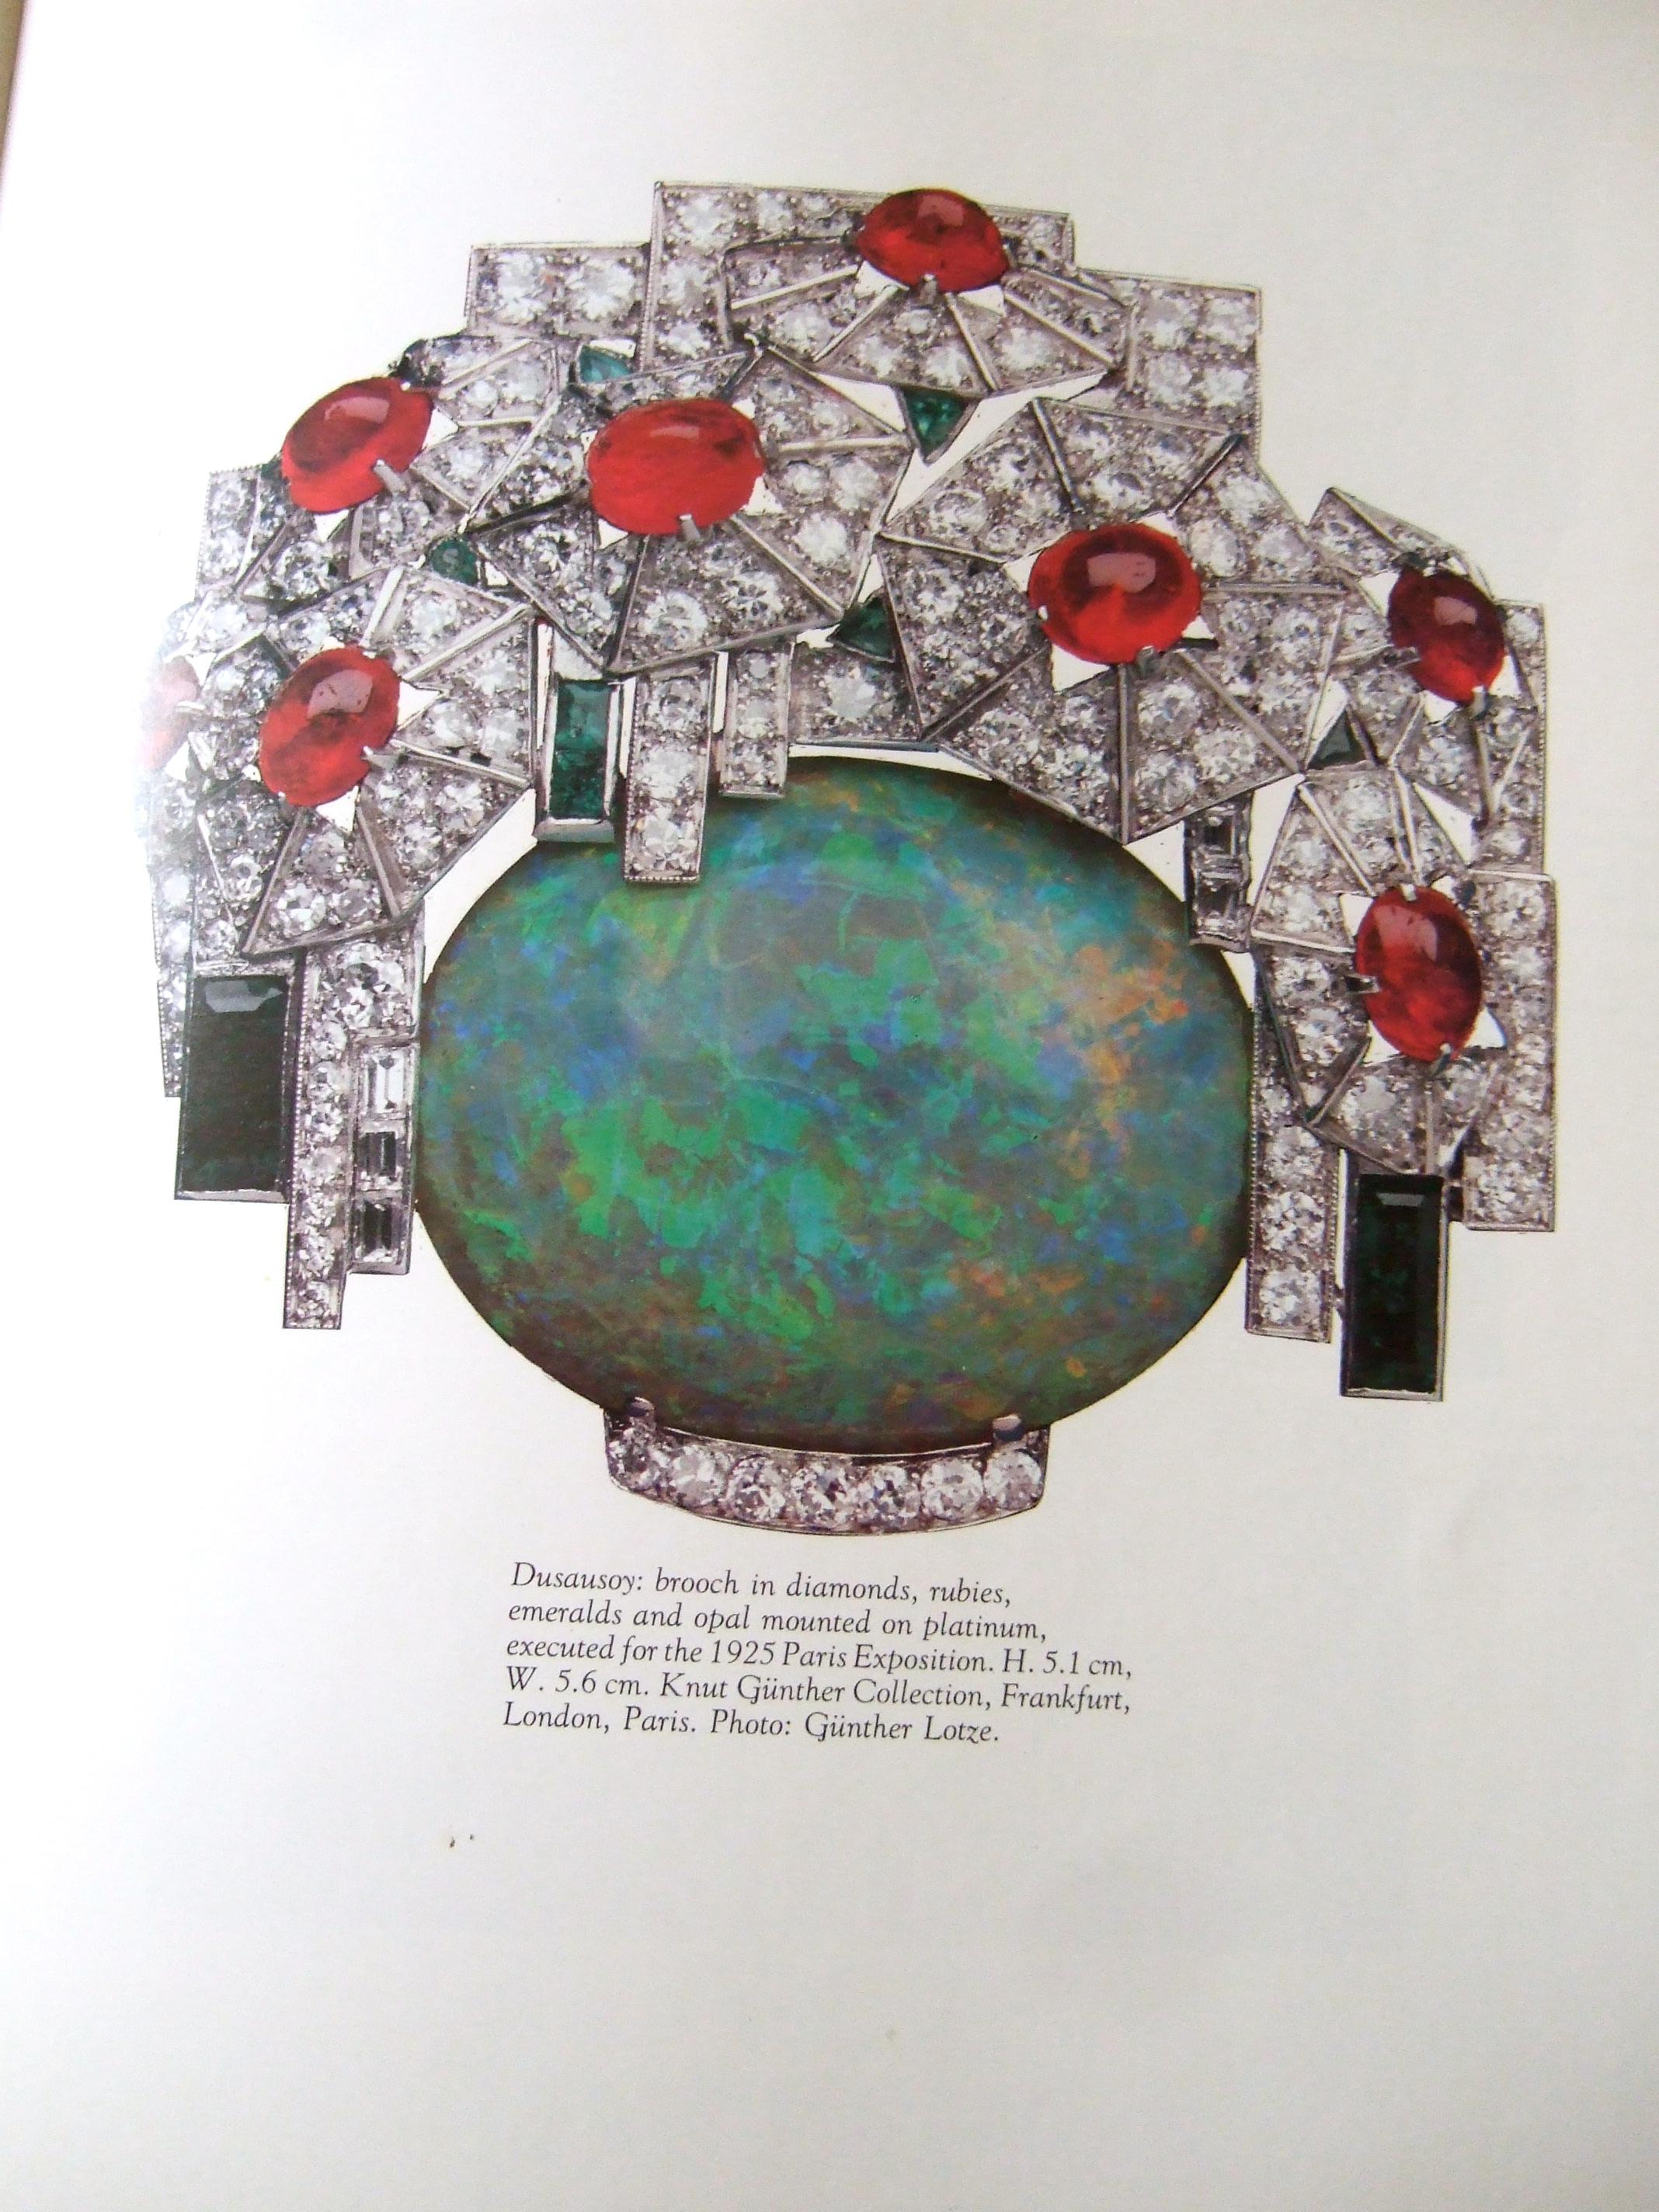 The rare hardcover large scale coffee table Rizzoli book is an extraordinary archive of 20th century art deco jewelry and accessories 
The 329 page book features exquisite art deco designs from preeminent 20th century jewelry companies; Boucheron,